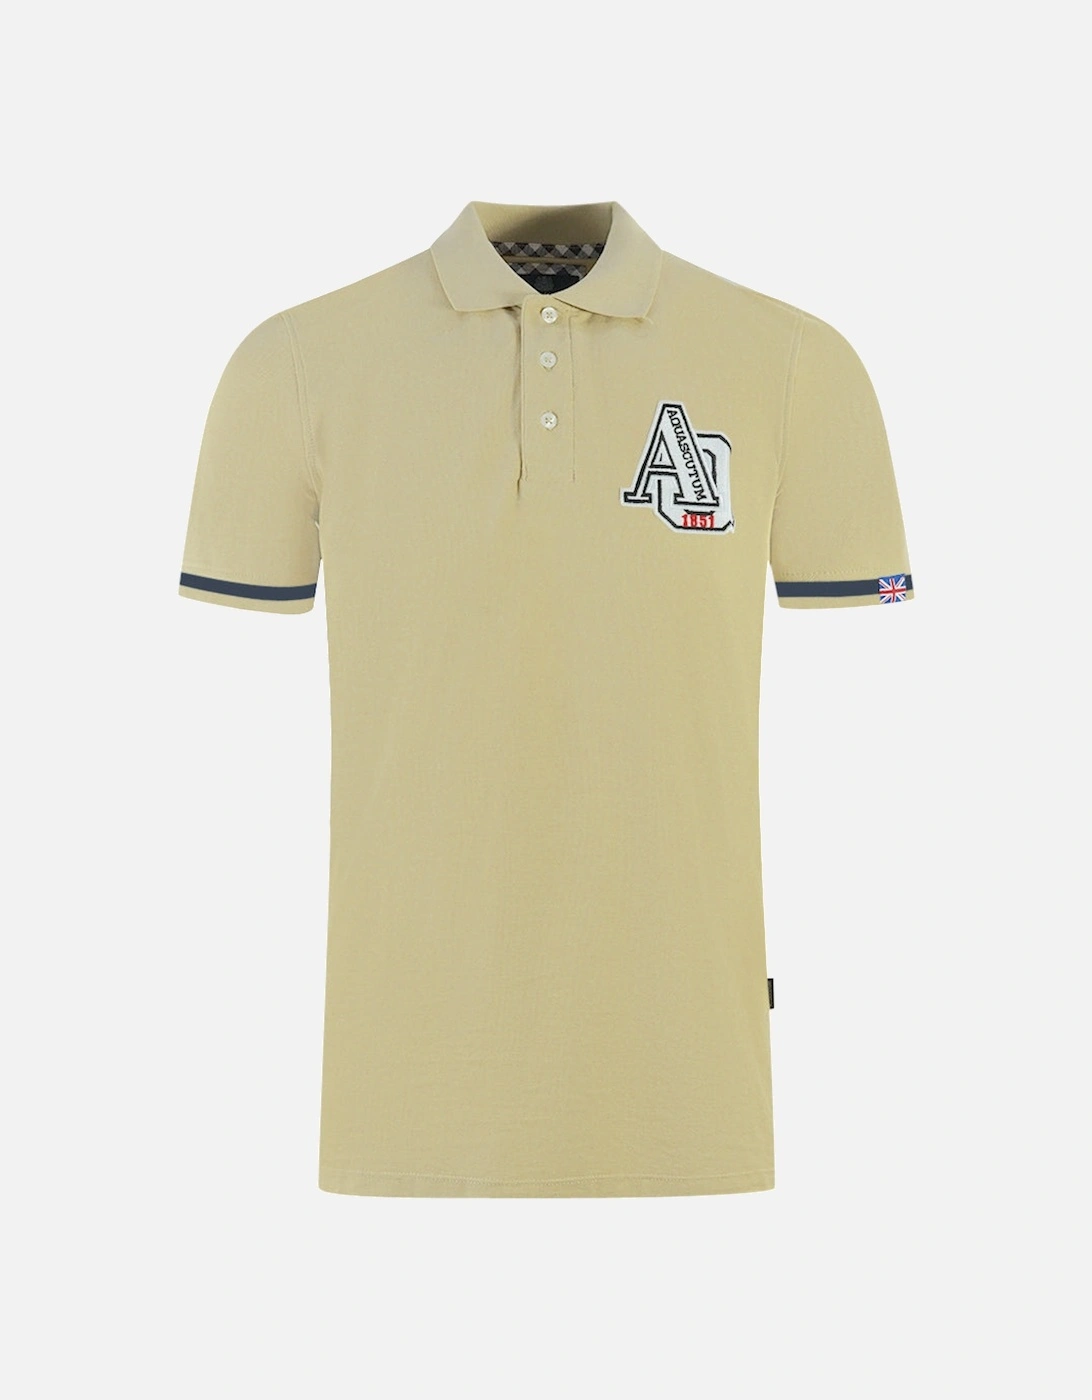 AQ 1851 Embroidered Tipped Beige Polo Shirt, 4 of 3